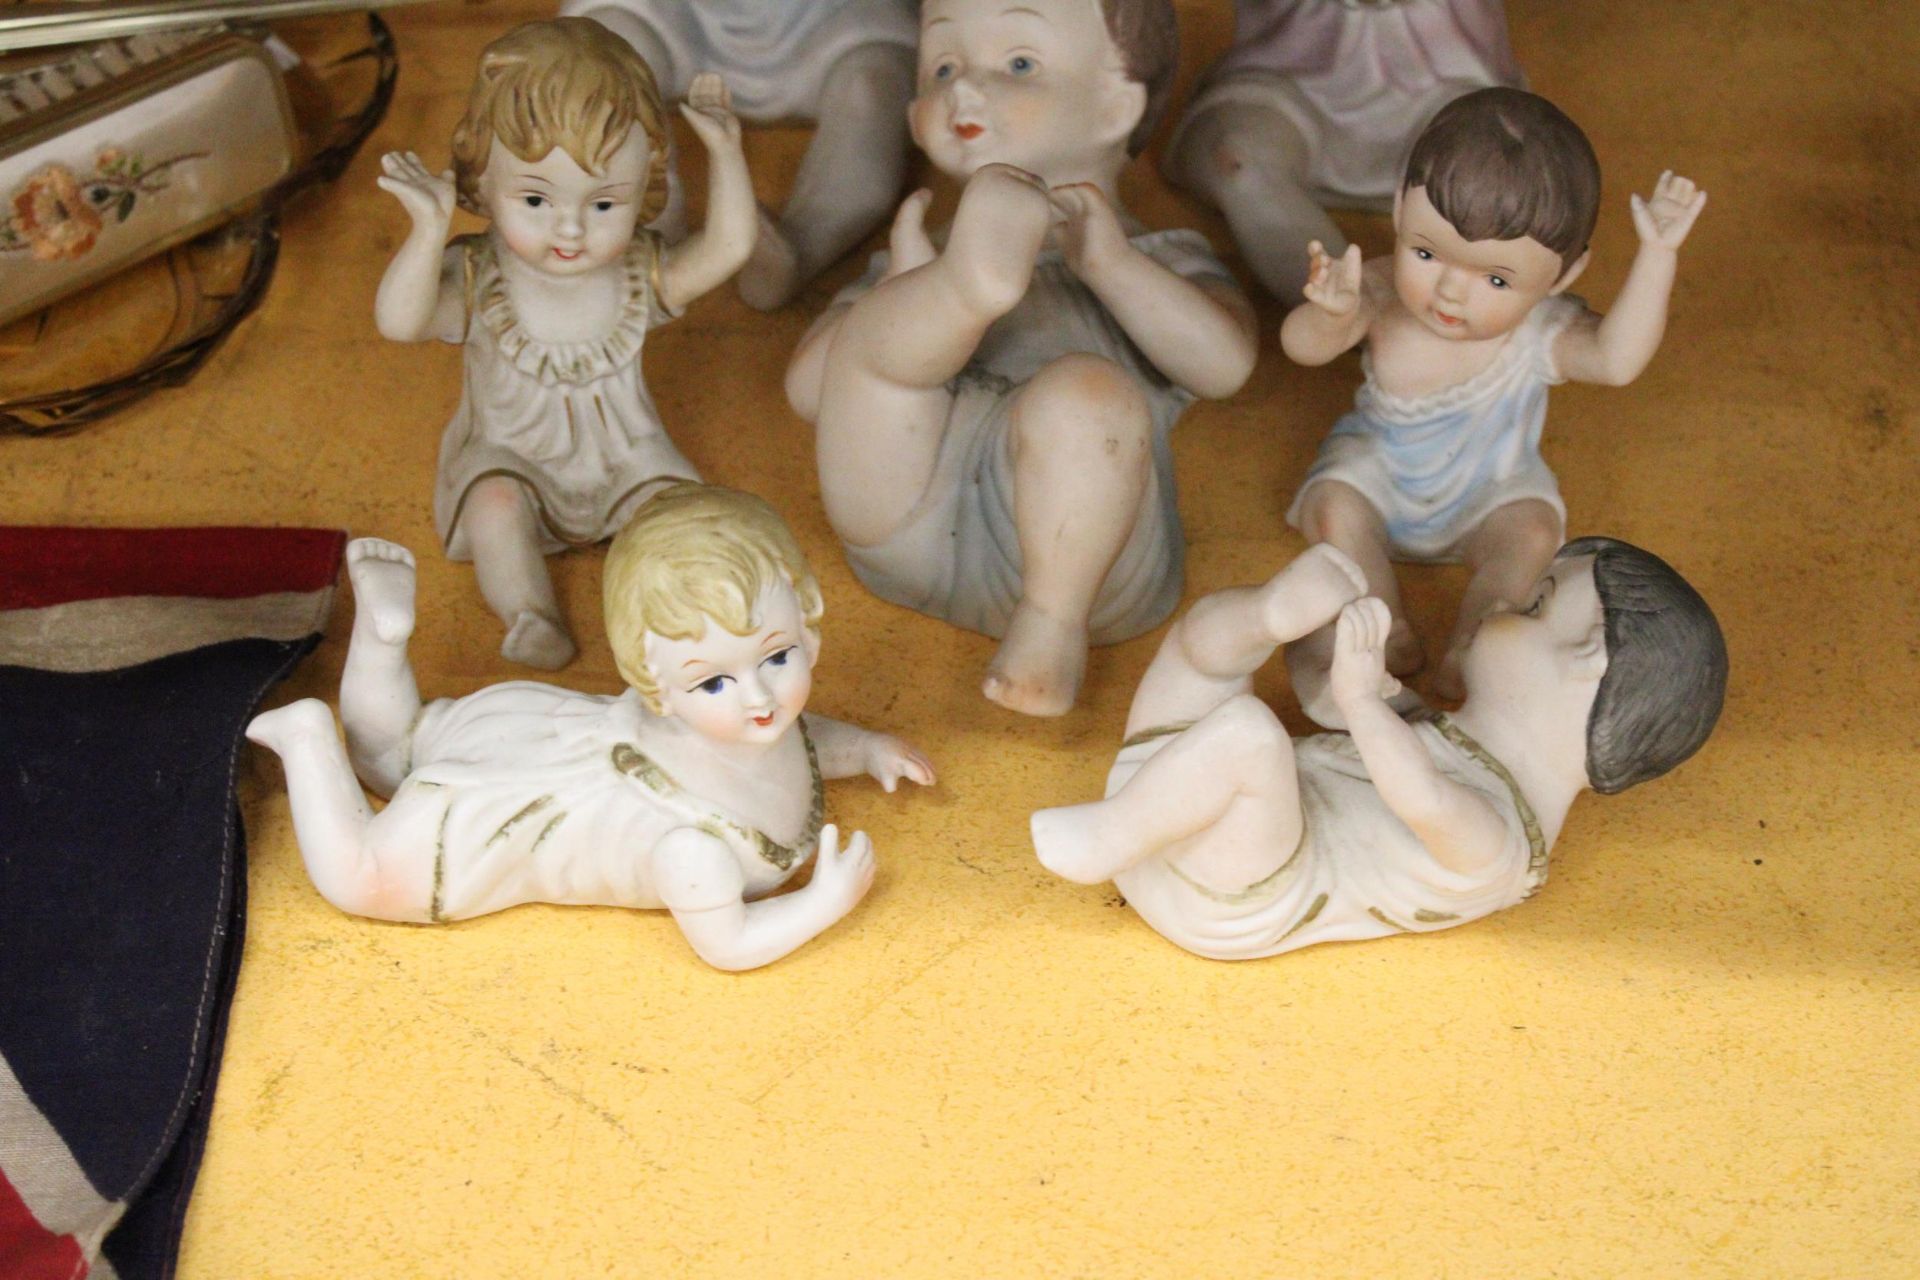 THREE LARGE AND FOUR SMALL ANTIQUE PORCELAIN, BISQUE DOLLS - Image 4 of 5